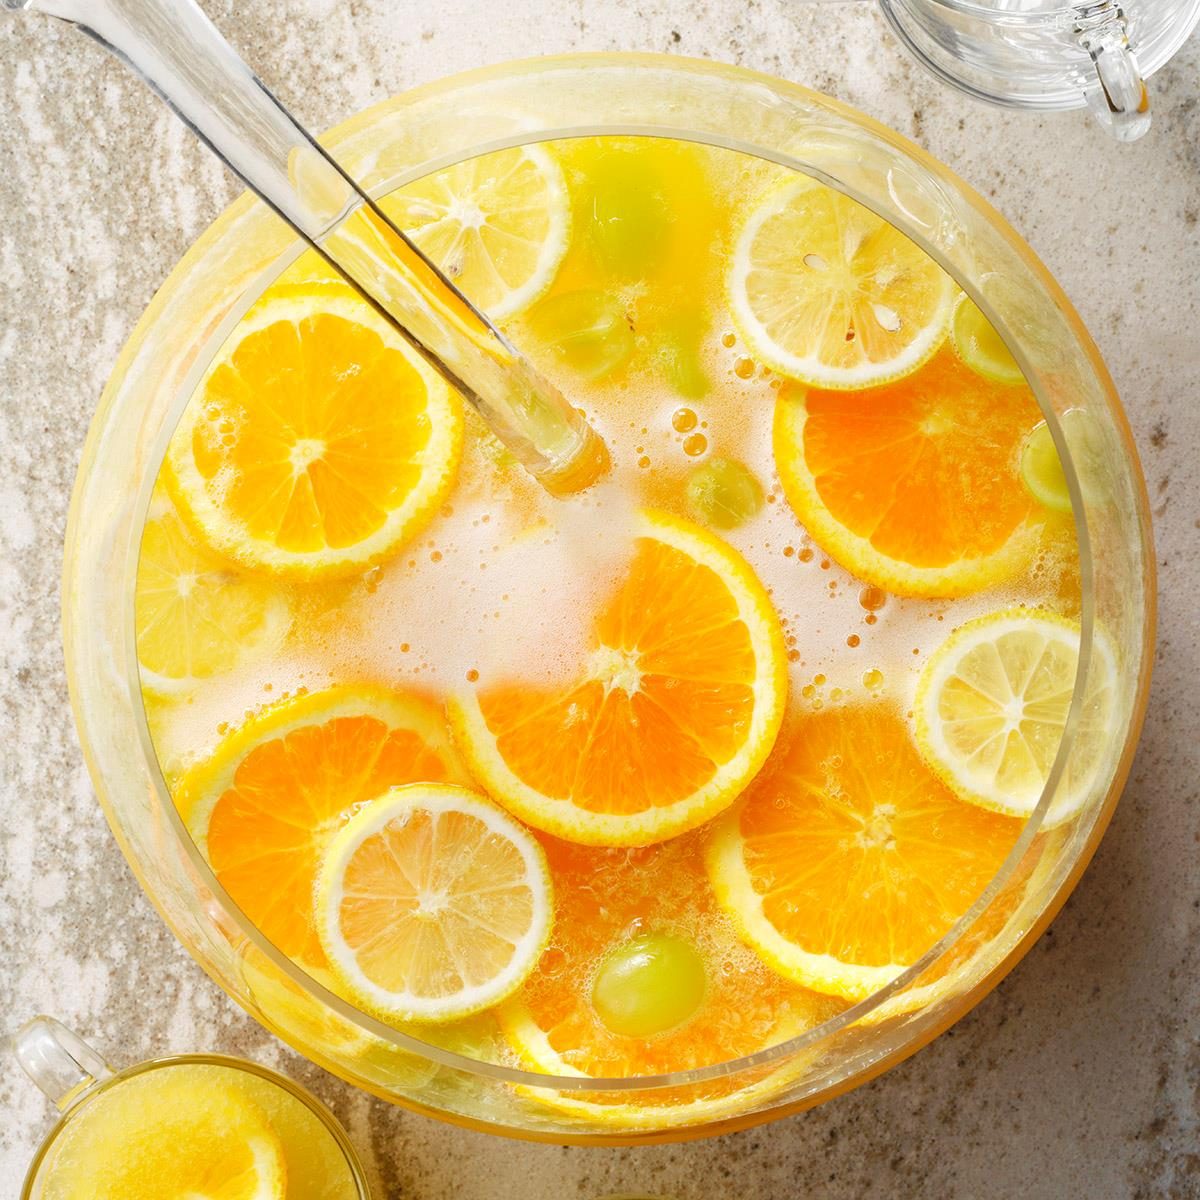 Citrus & White Grape Juice Party Punch Recipe: How to Make It